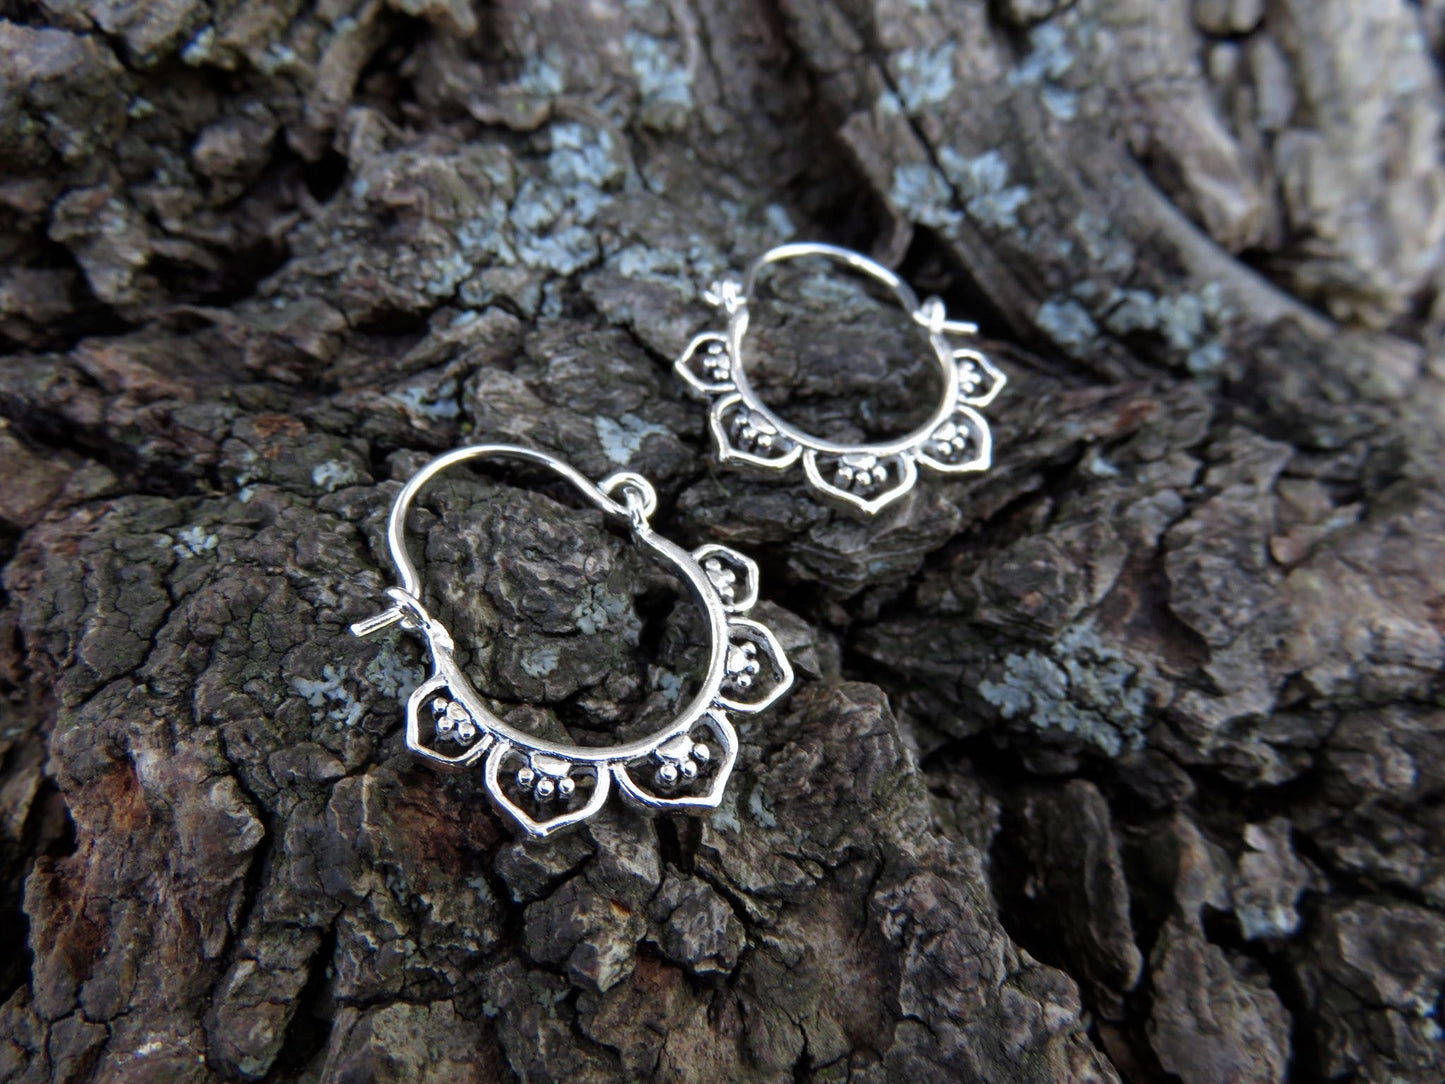 mini hoop earrings with flower pattern made of silver or silver-gold plated